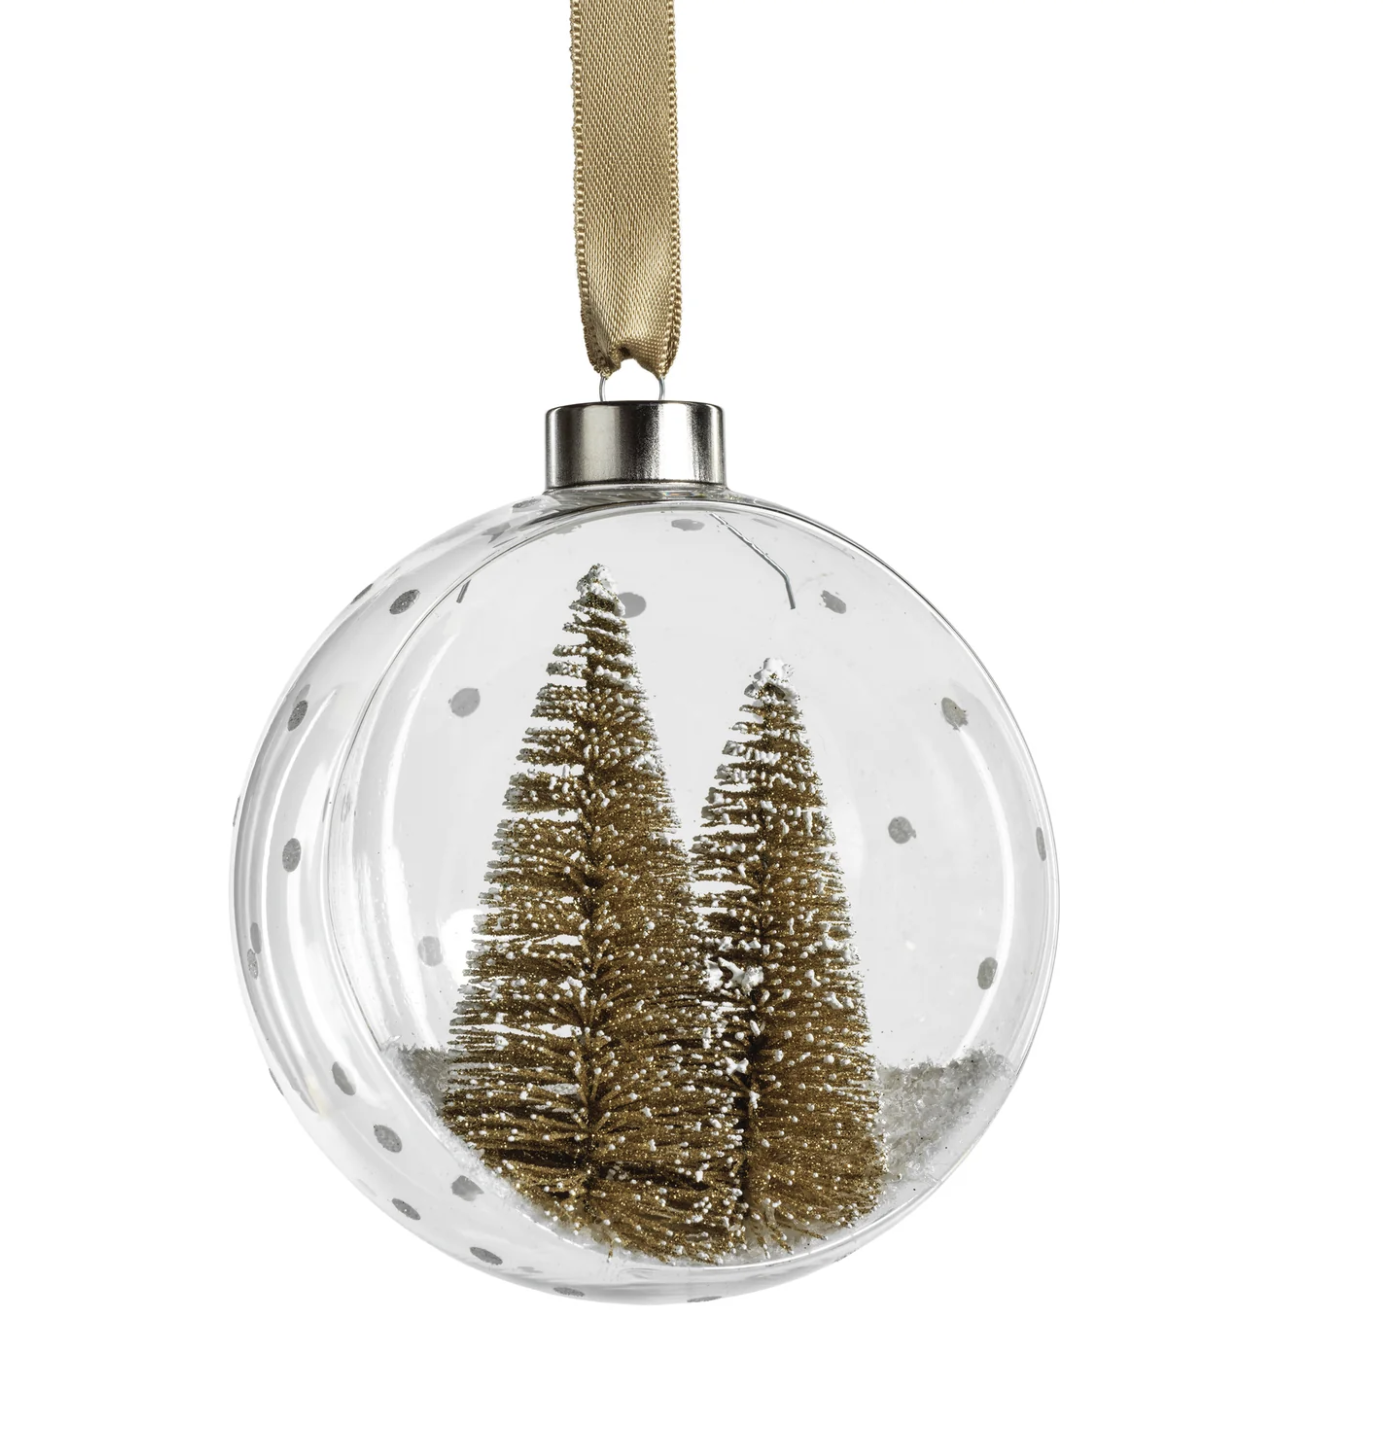 ZODAX Clear Glass Ornament with Pine Trees - Gold - Large